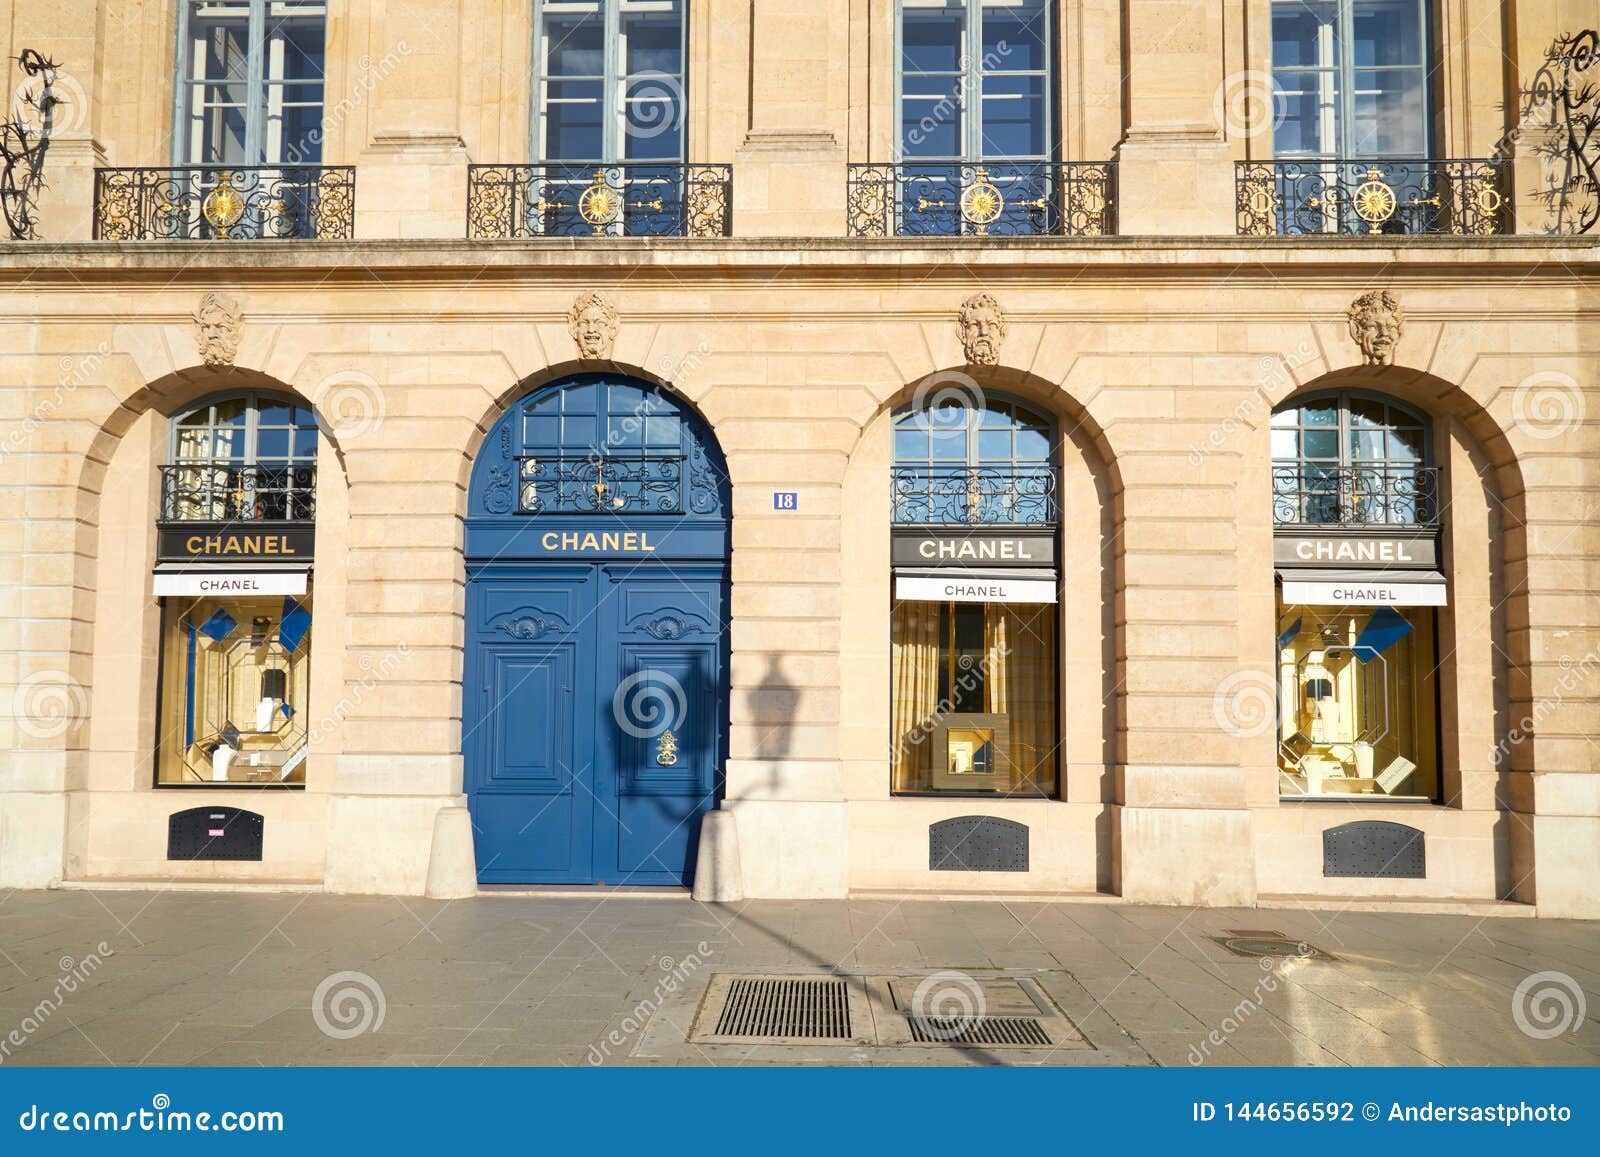 Chanel Luxury Store In Place Vendome In Paris, France Editorial Photography - Image of boutique ...